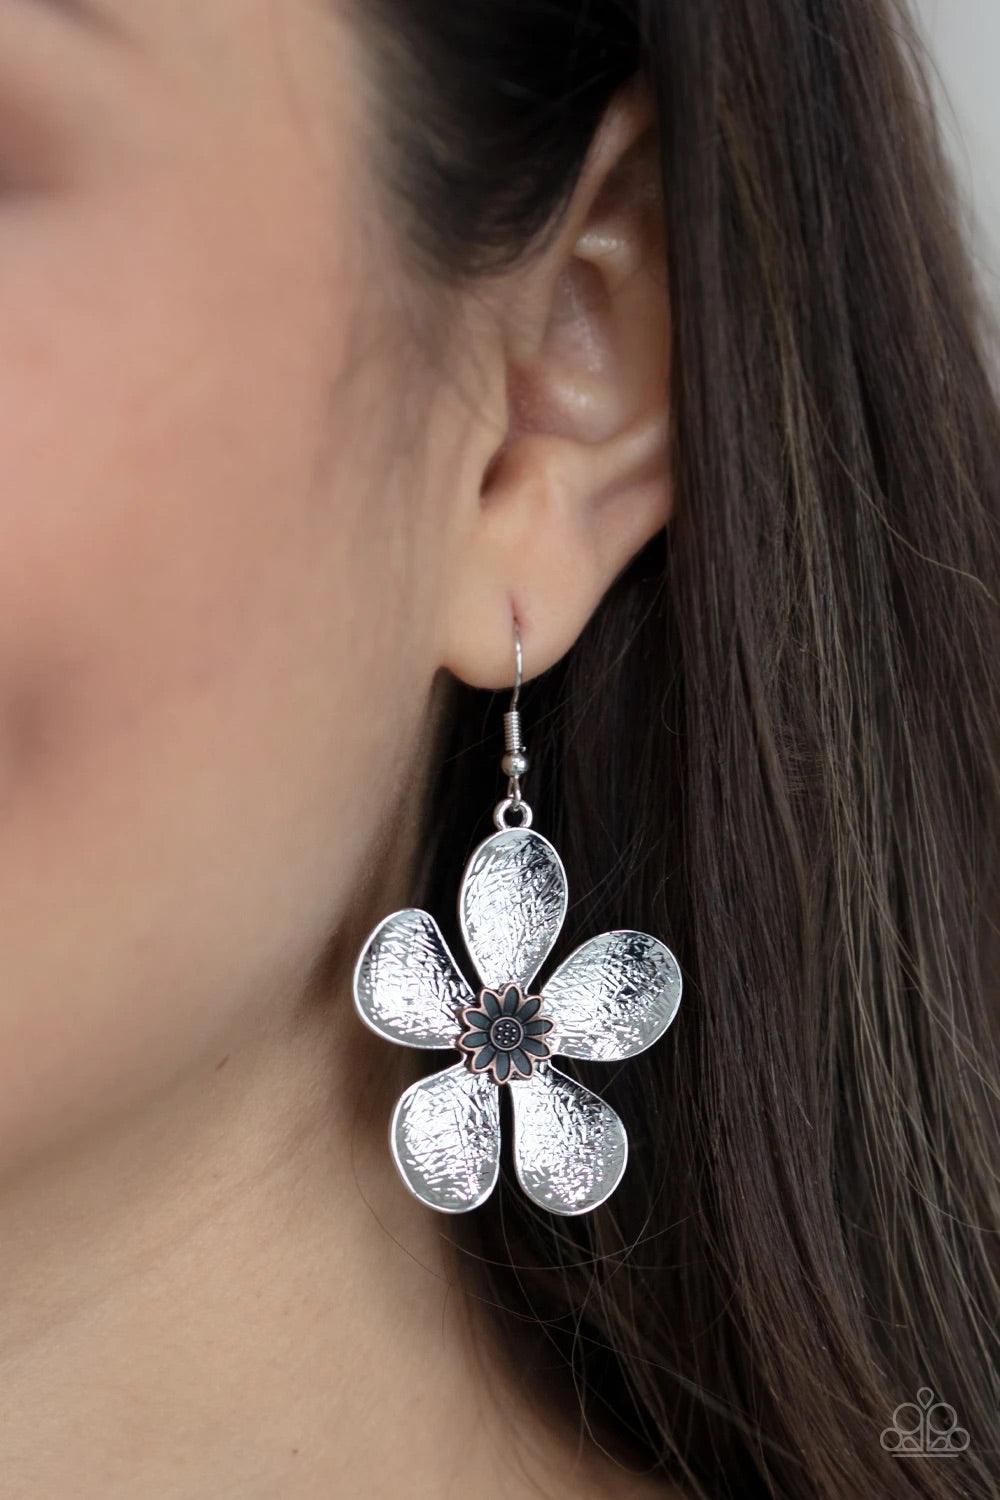 Paparazzi Accessories Fresh Florals - Silver Shiny etched silver petals bloom from a copper floral adorned center, creating a whimsical display. Earring attaches to a standard fishhook fitting. Sold as one pair of earrings. Jewelry